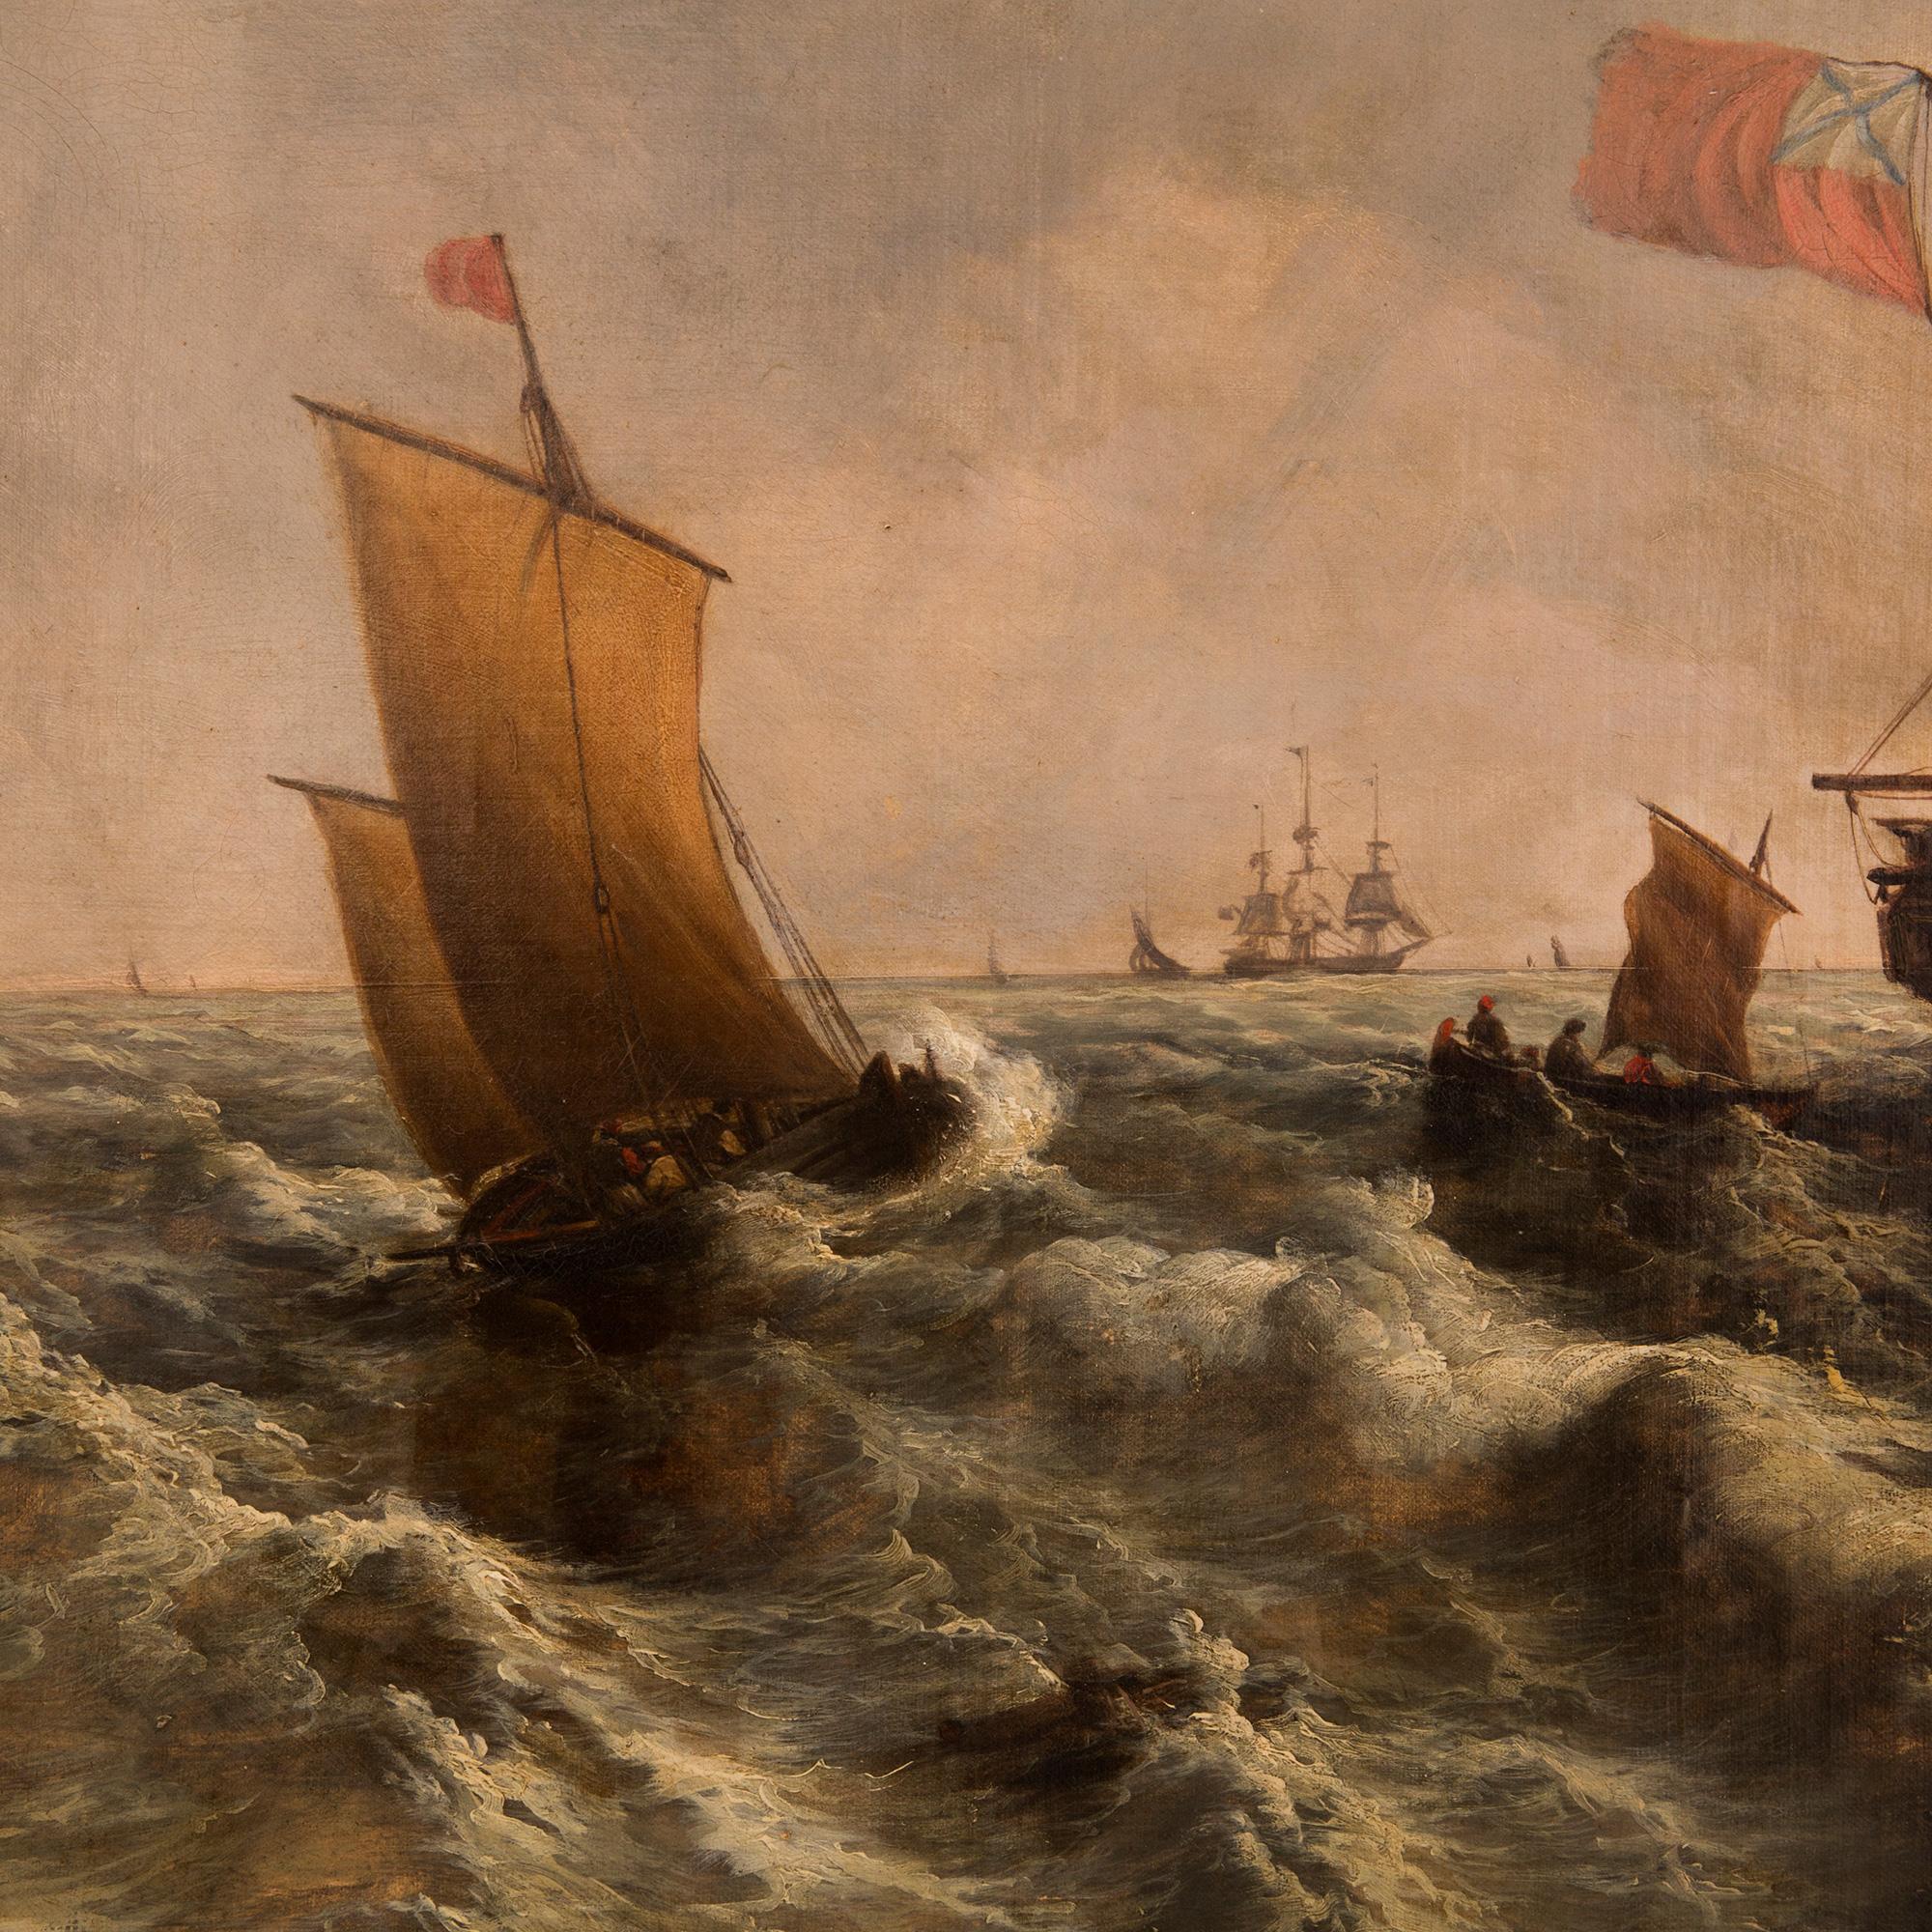 type of painting depicting maritime scenes